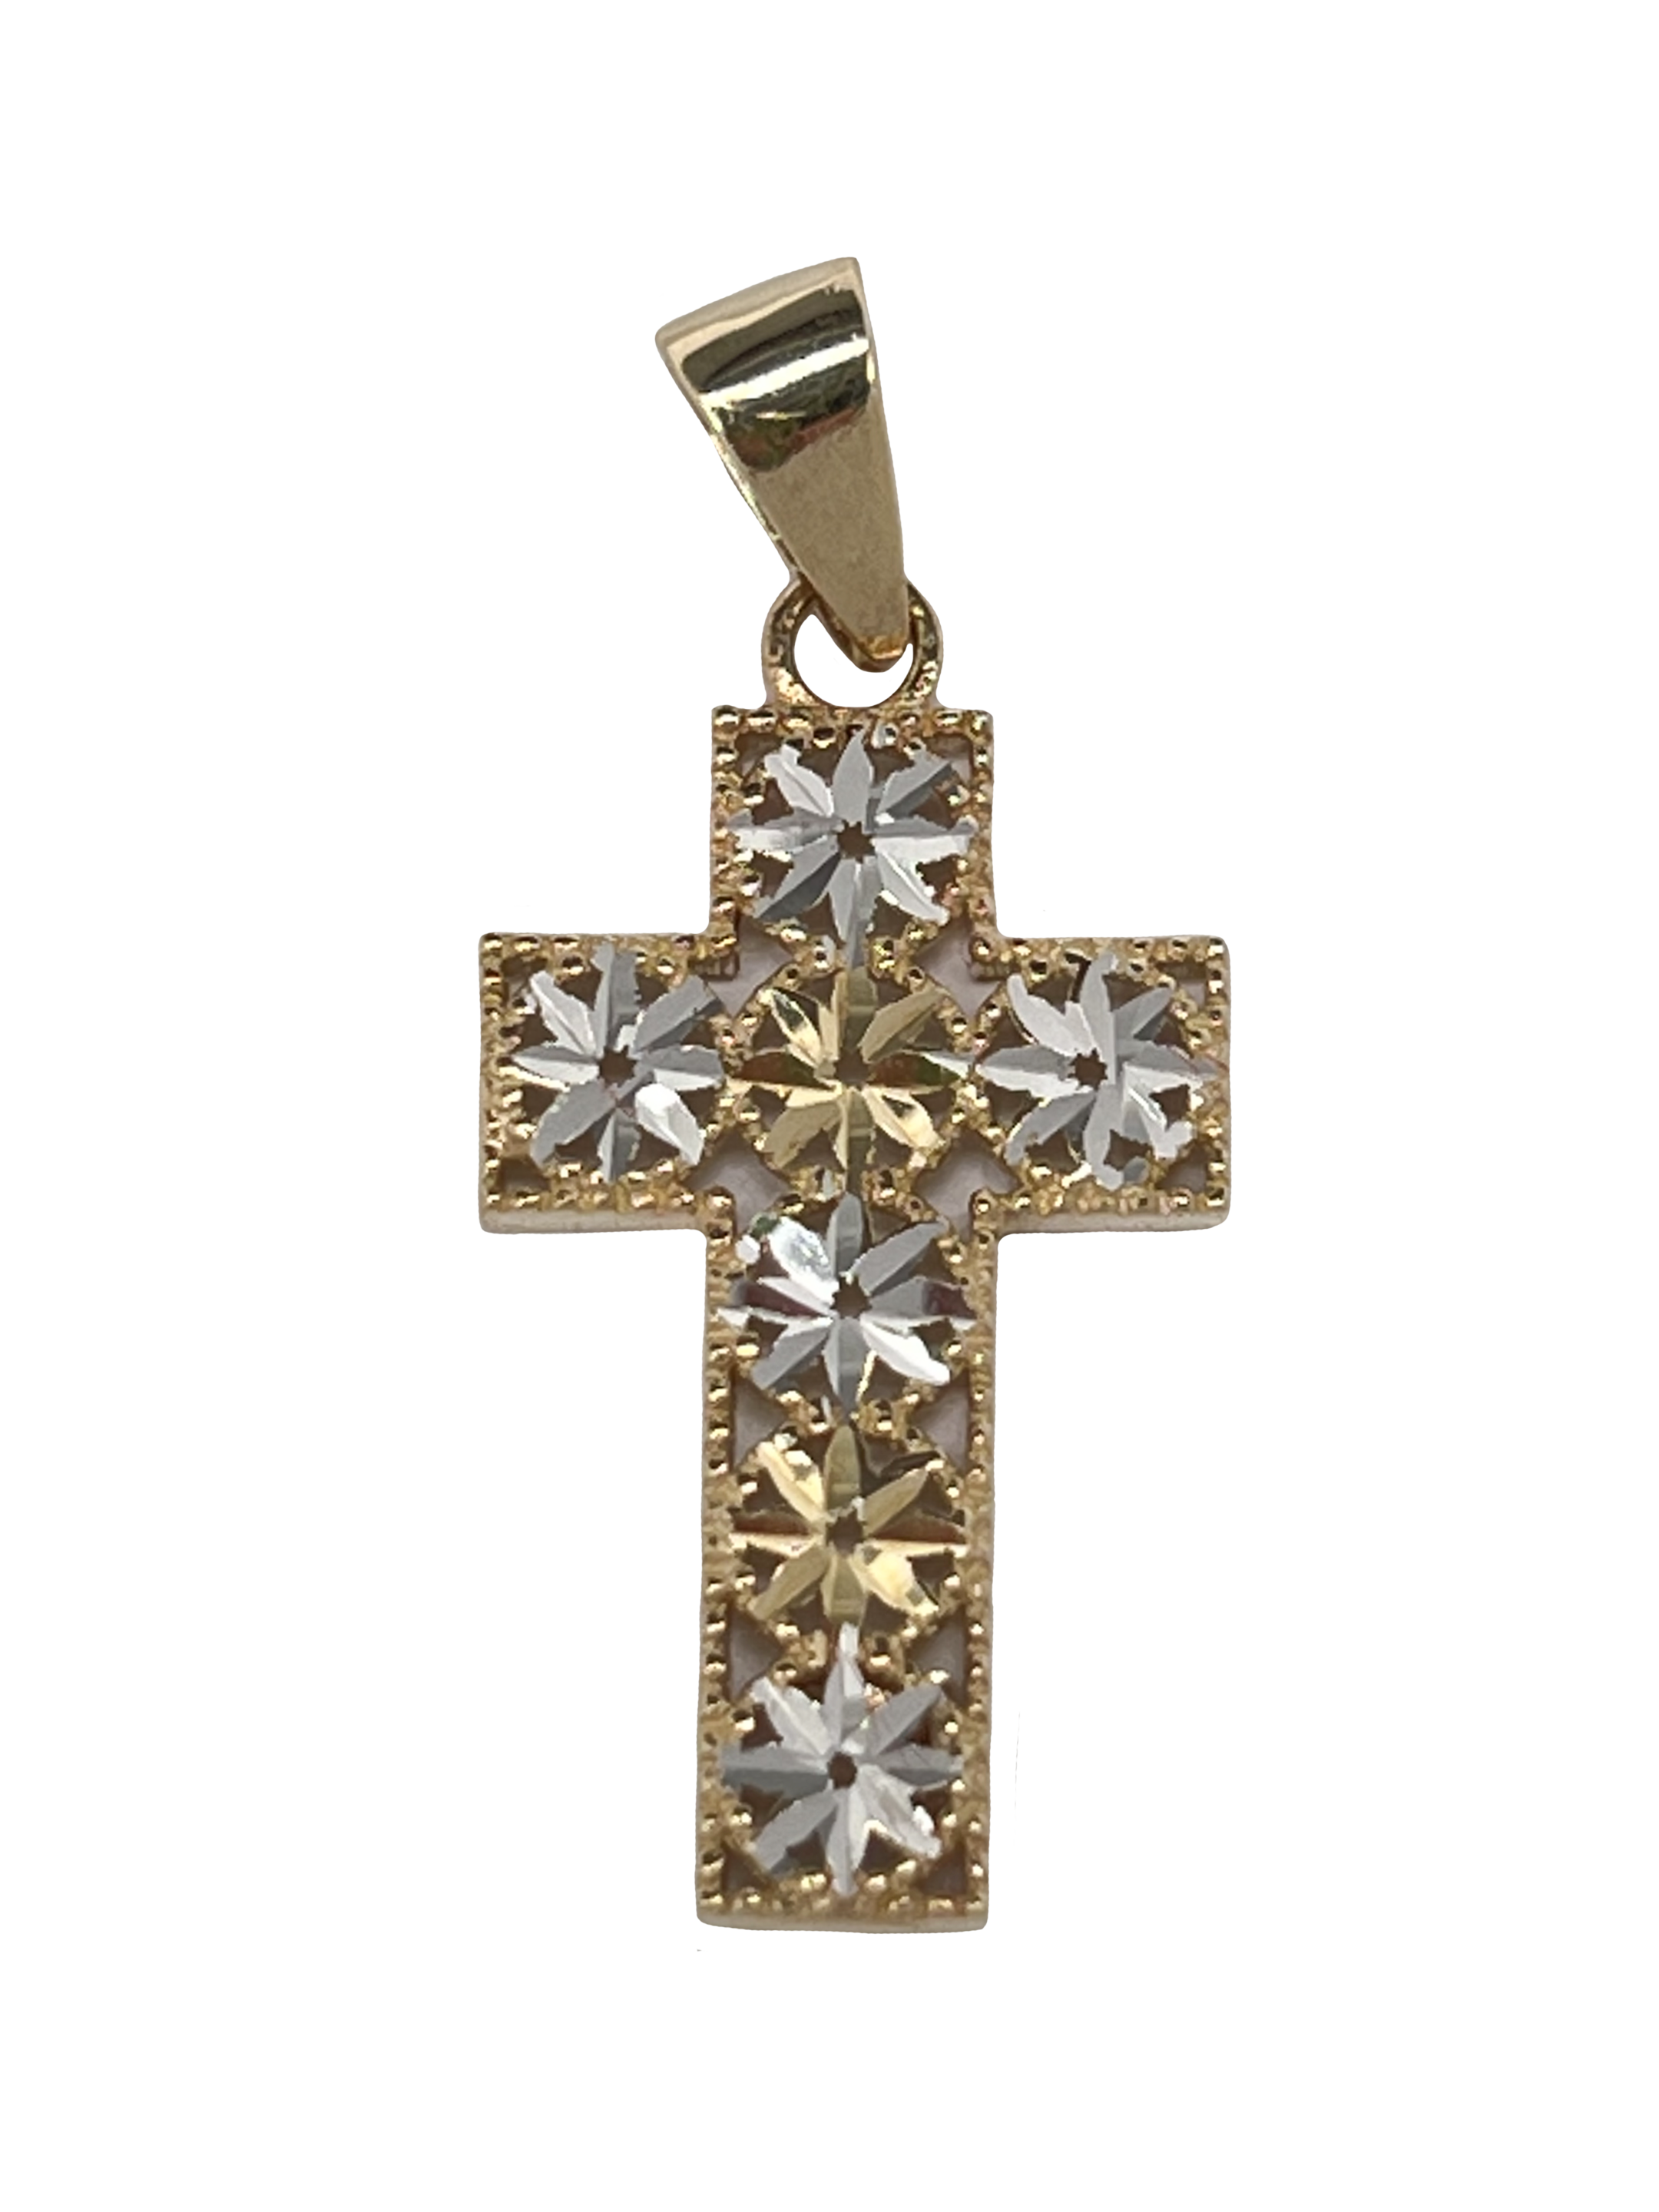 Gold cross pendant made of combined gold